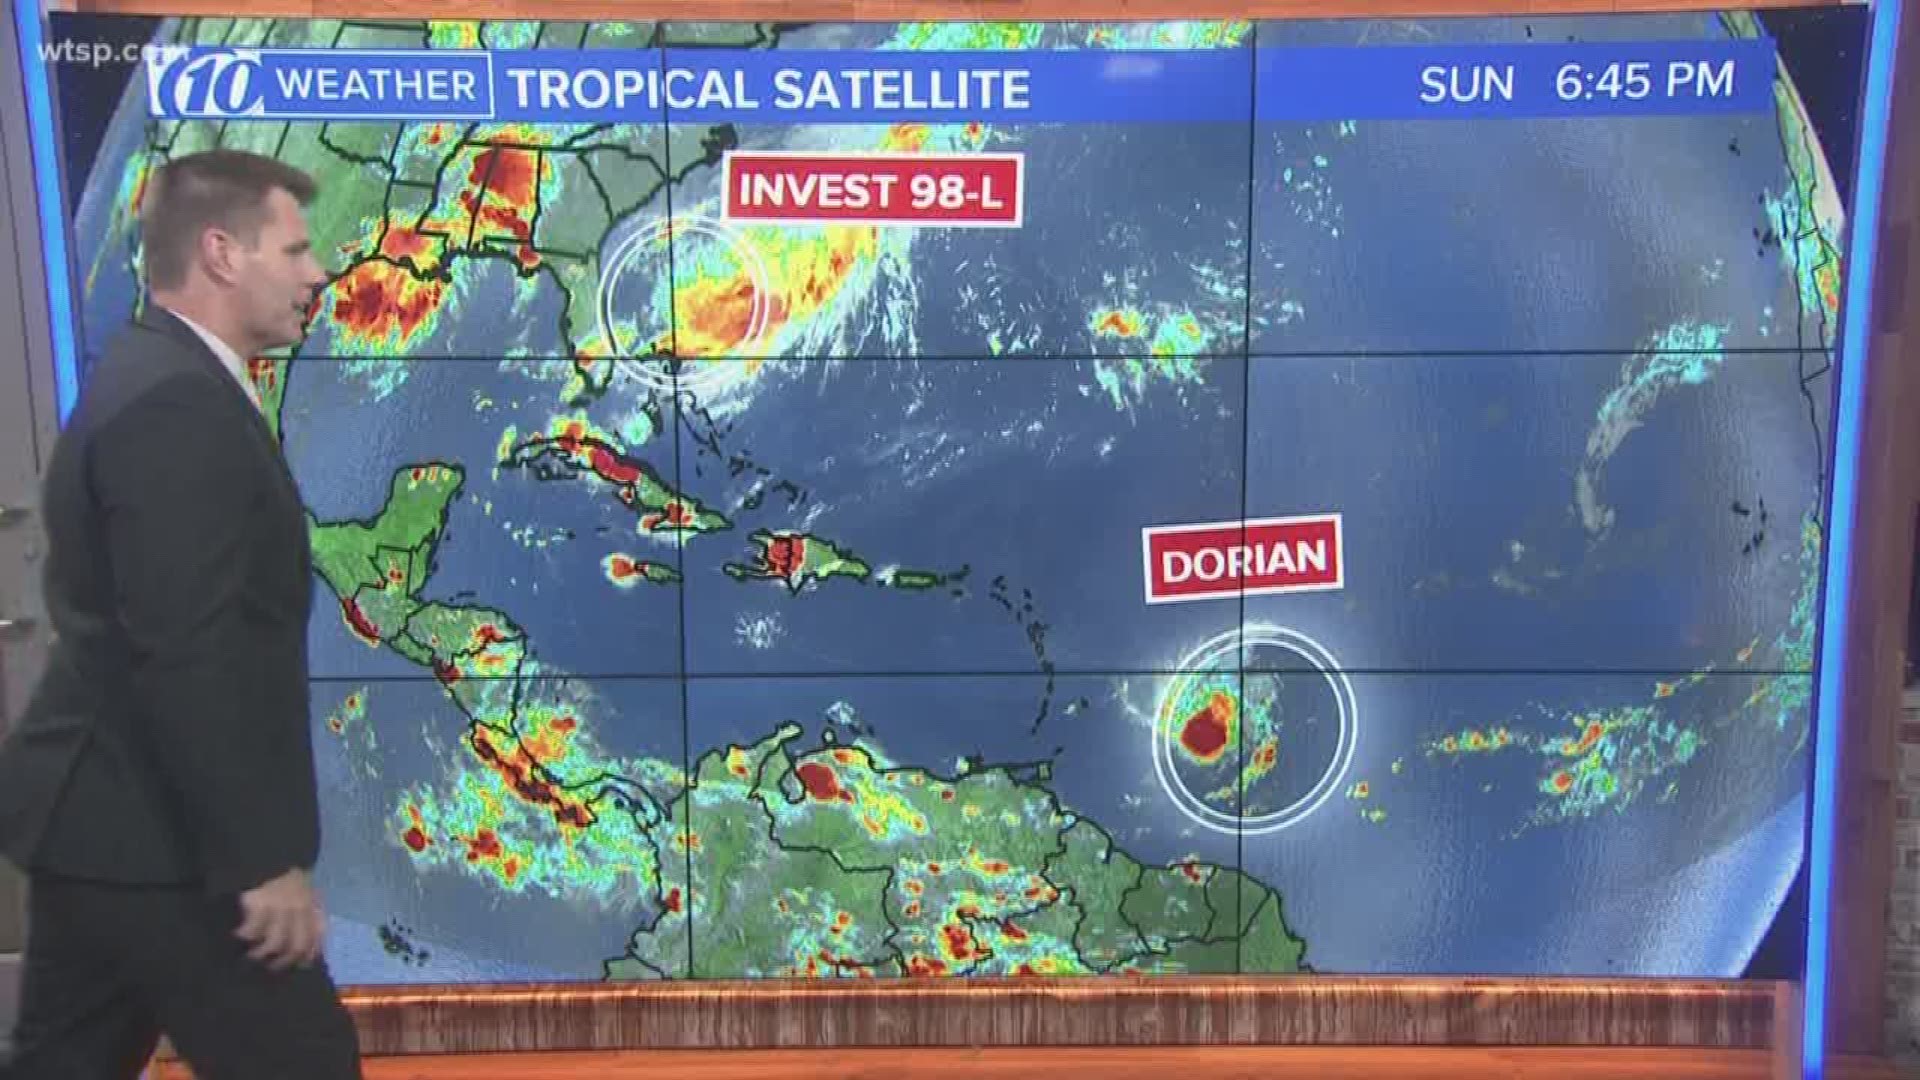 Tropical Storm Dorian is becoming better organized far out in the Atlantic Ocean, and it bears watching in the coming days.

Maximum sustained winds are 50 mph, and the storm is located about 375 miles east-southeast of Barbados, according to the National Hurricane Center's latest advisory. It is moving west at 14 mph.